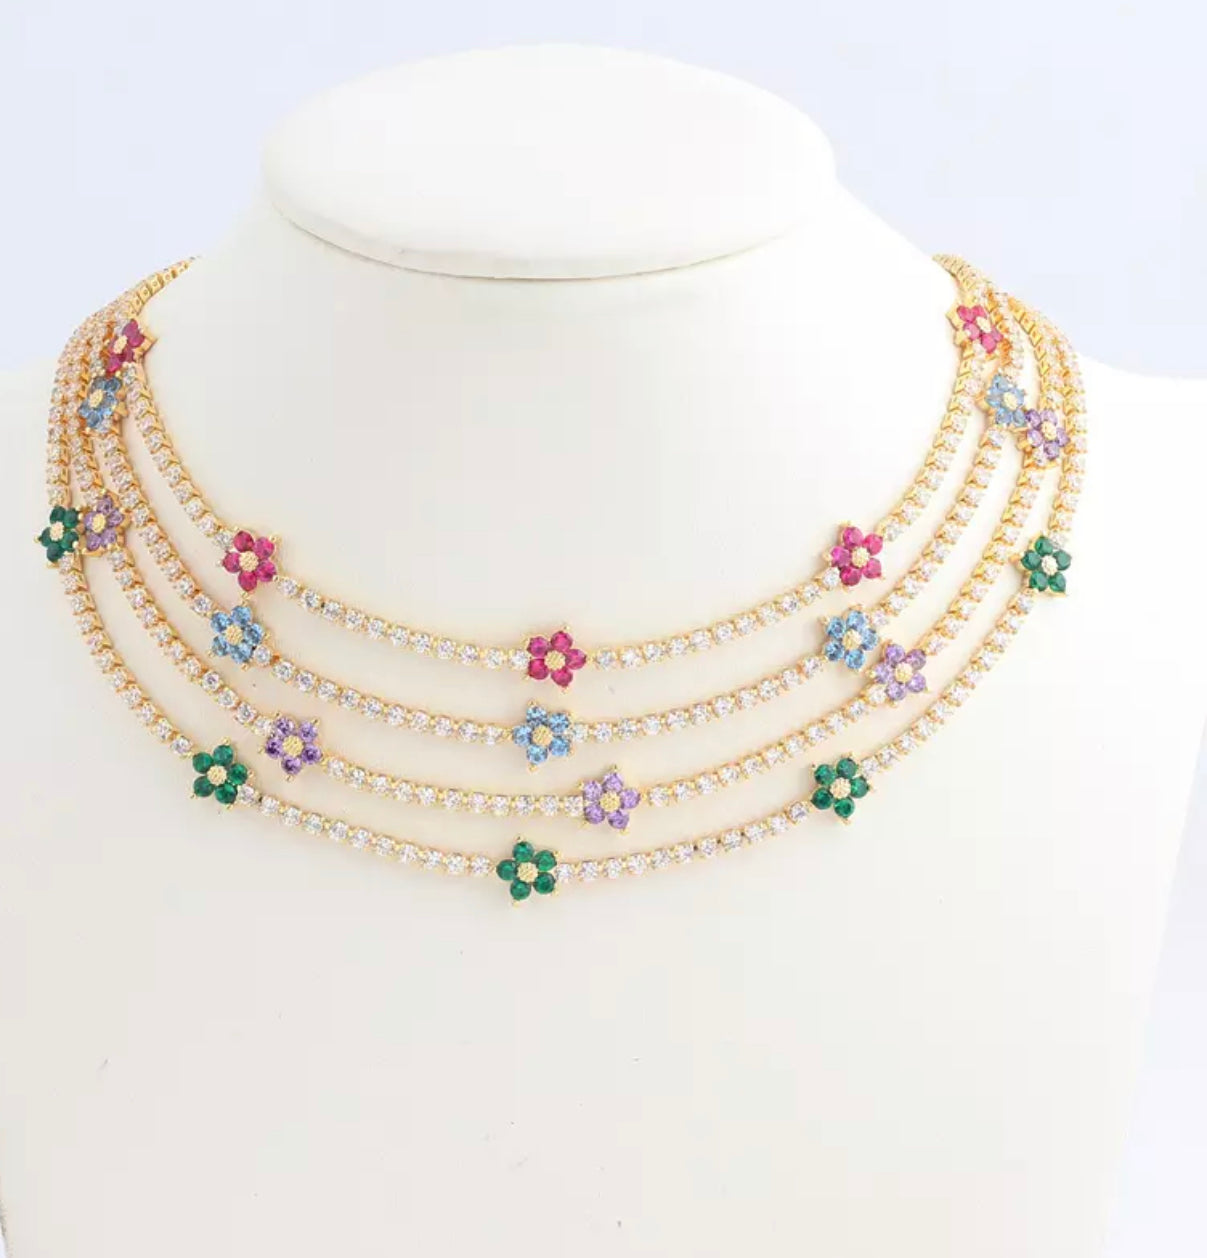 Lovely Necklace Chocker Stone Colorful Roses